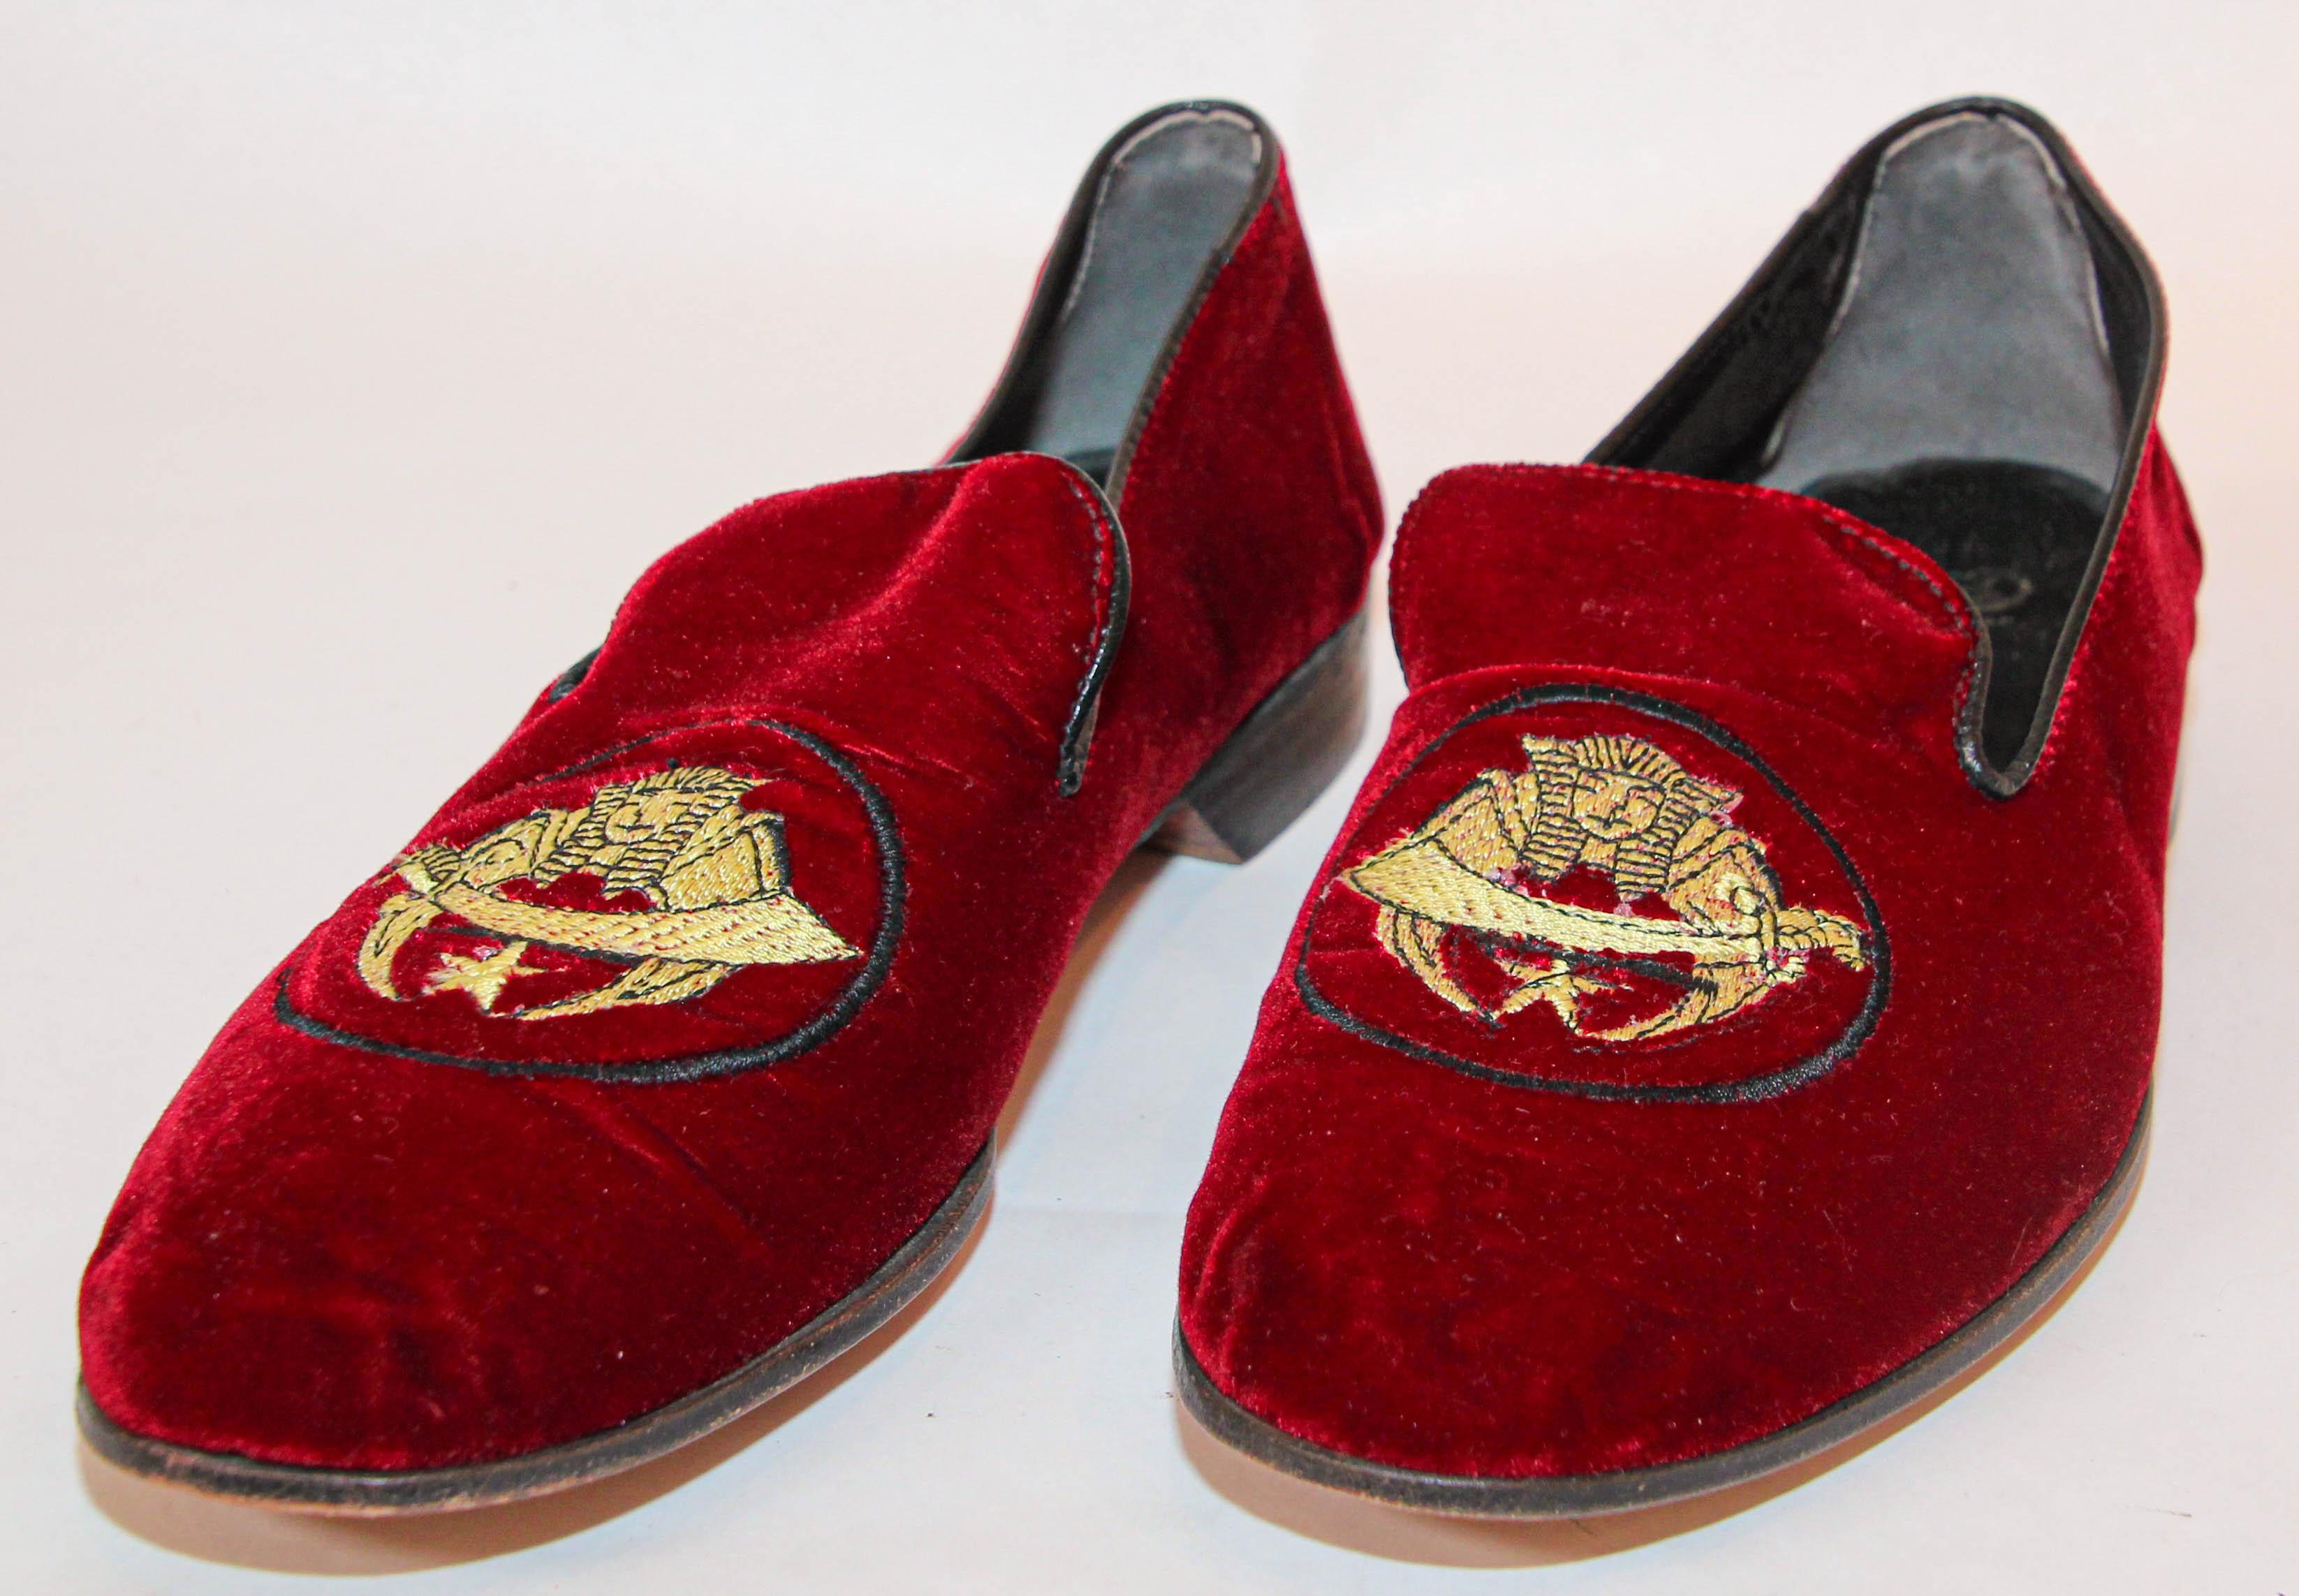 Shriner Red Velvet Shoes Embroidery Loafers Slip On Size 8.5 For Sale 8